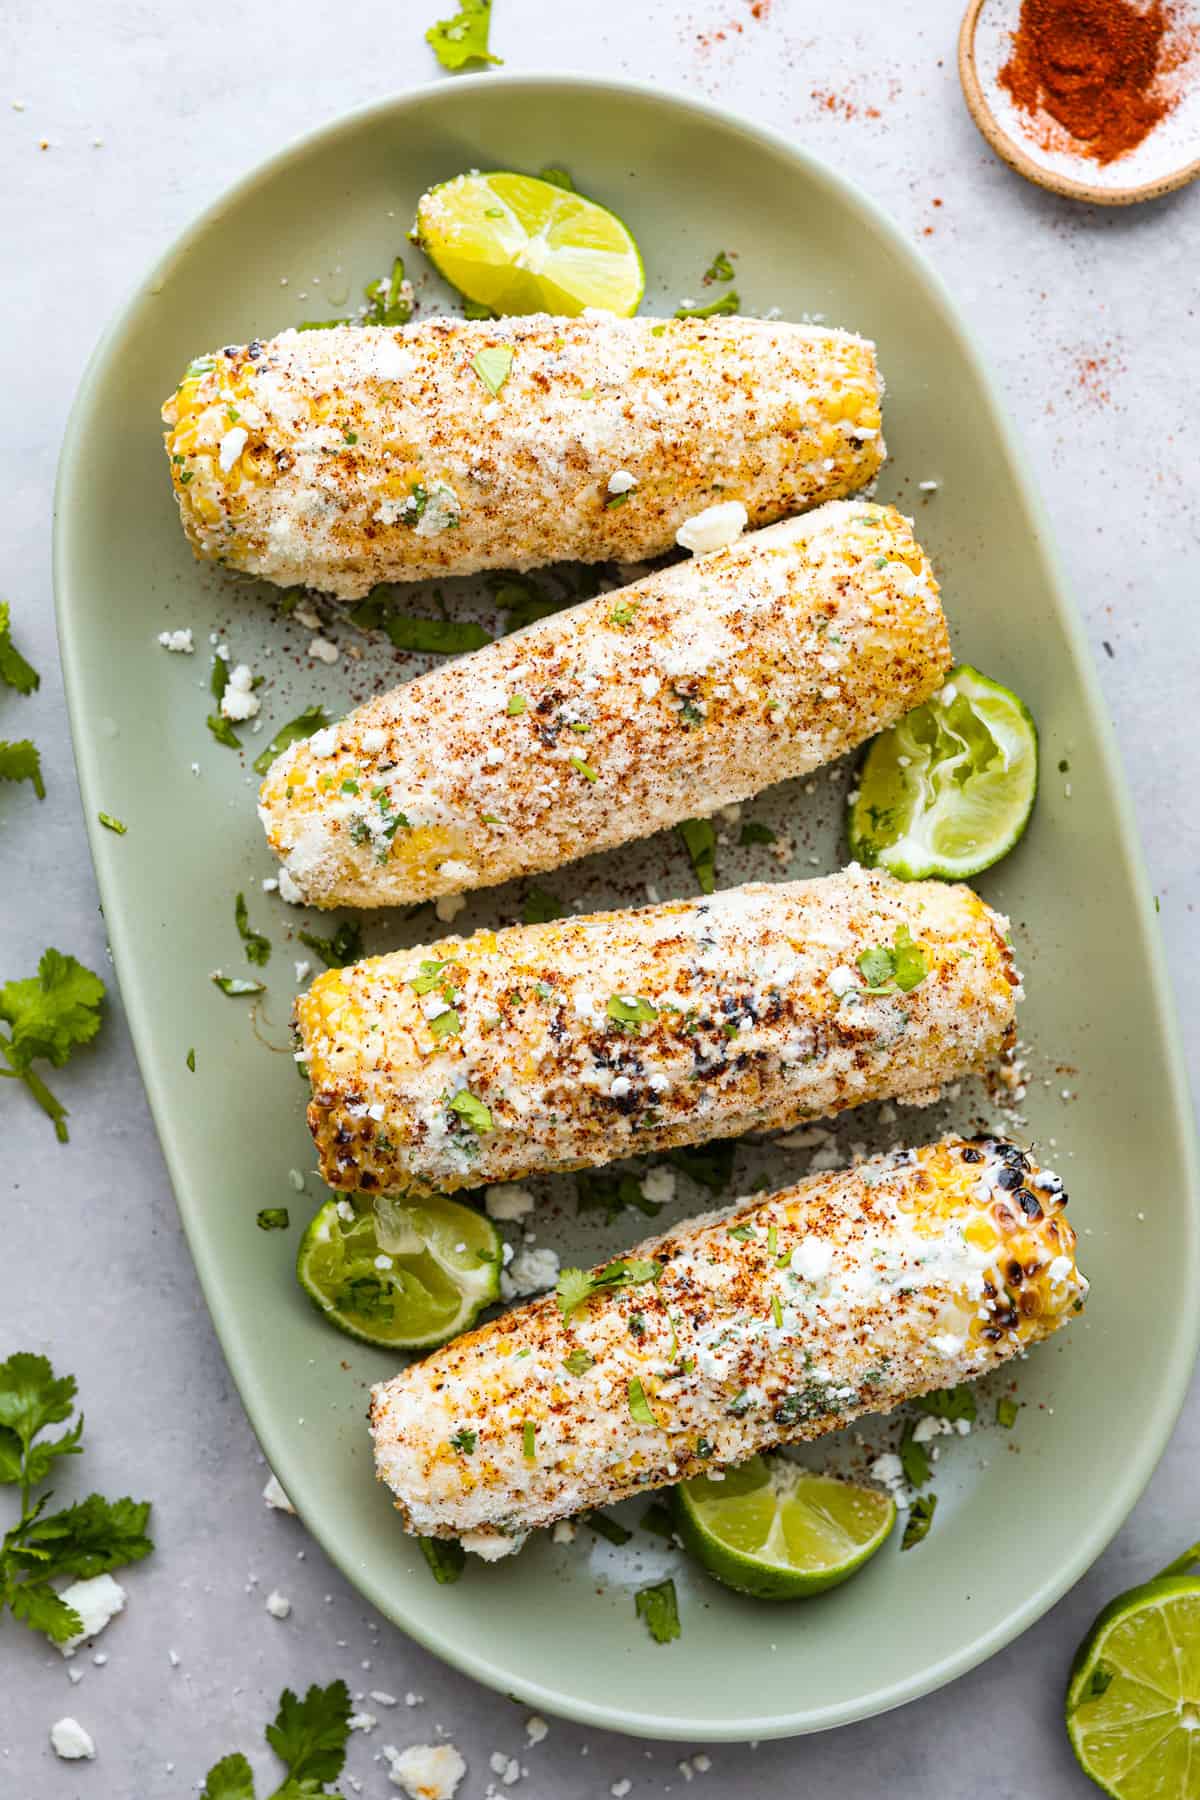 Grilled Mexican Street Corn - Yummy Recipe